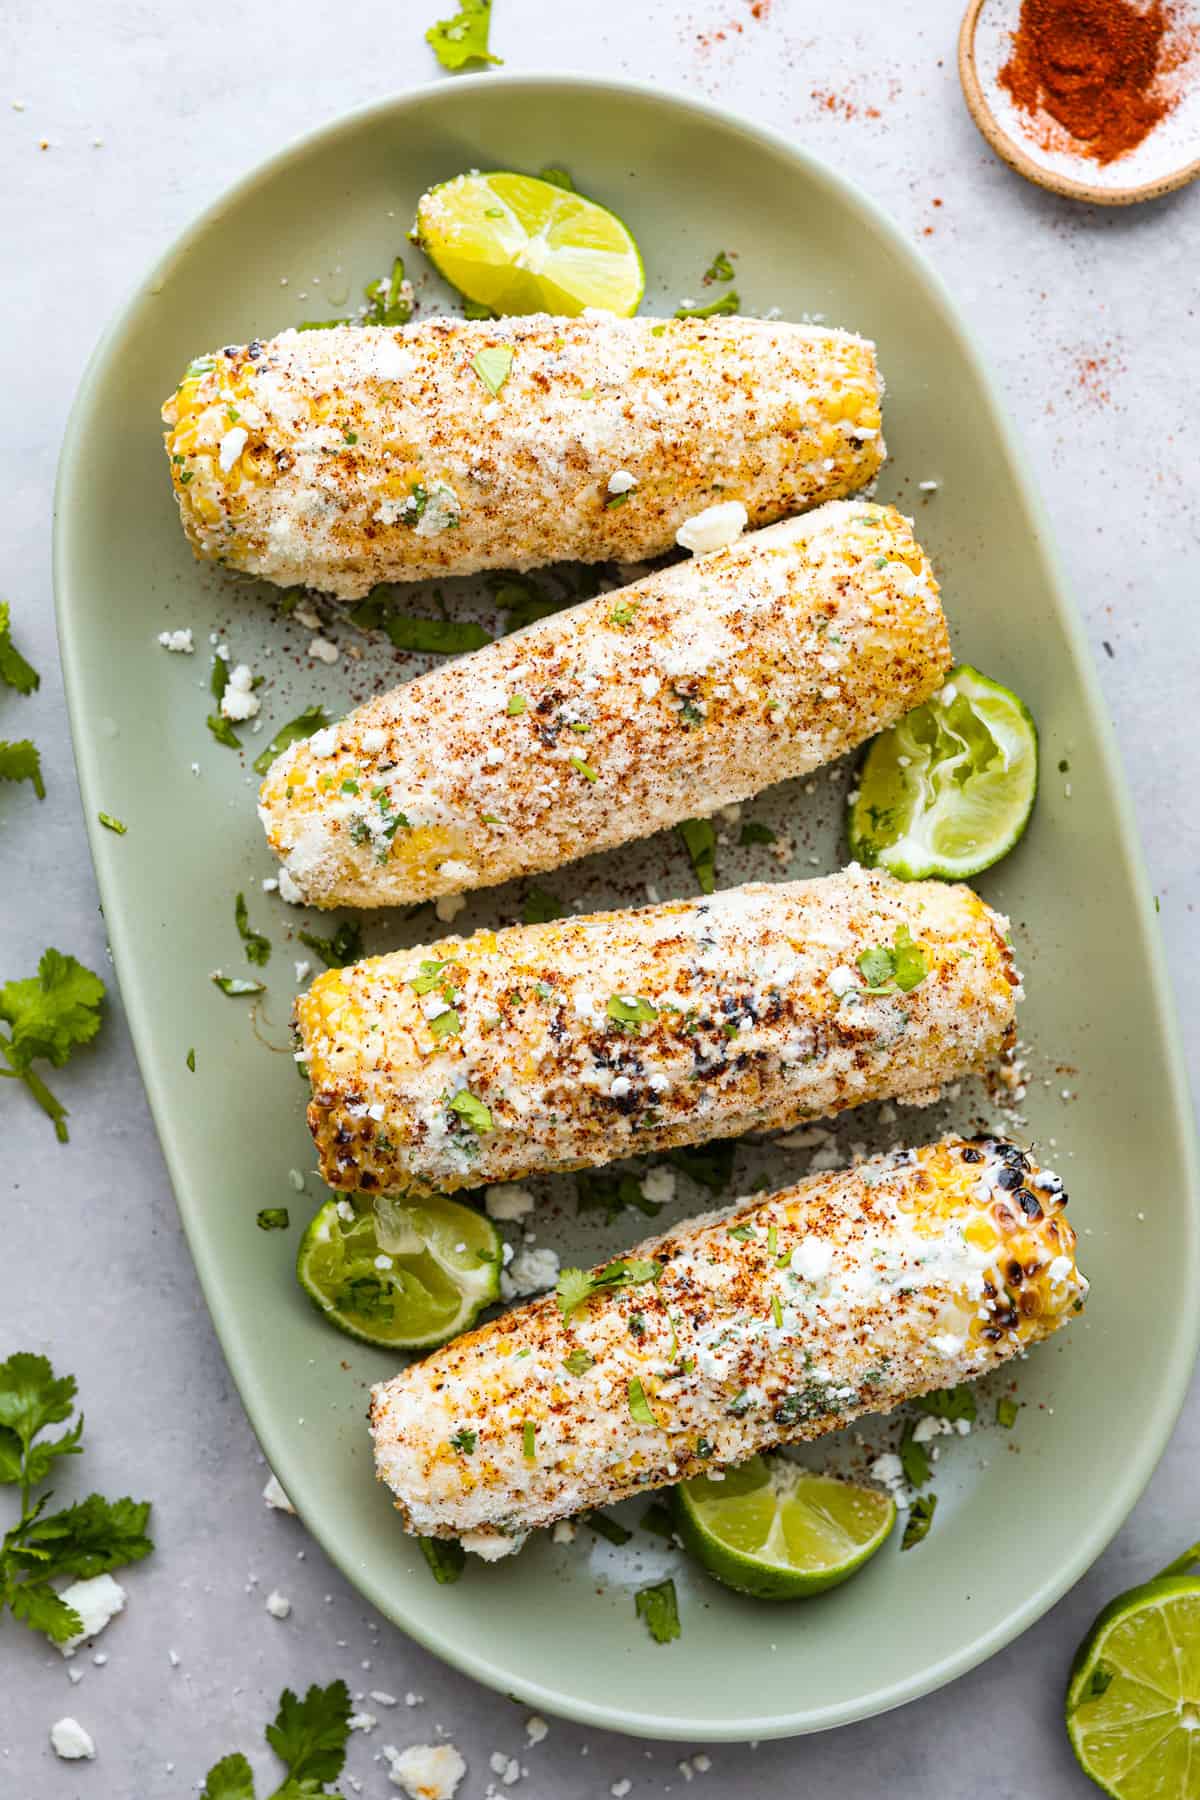 Grilled Mexican Street Corn - Yummy Recipe